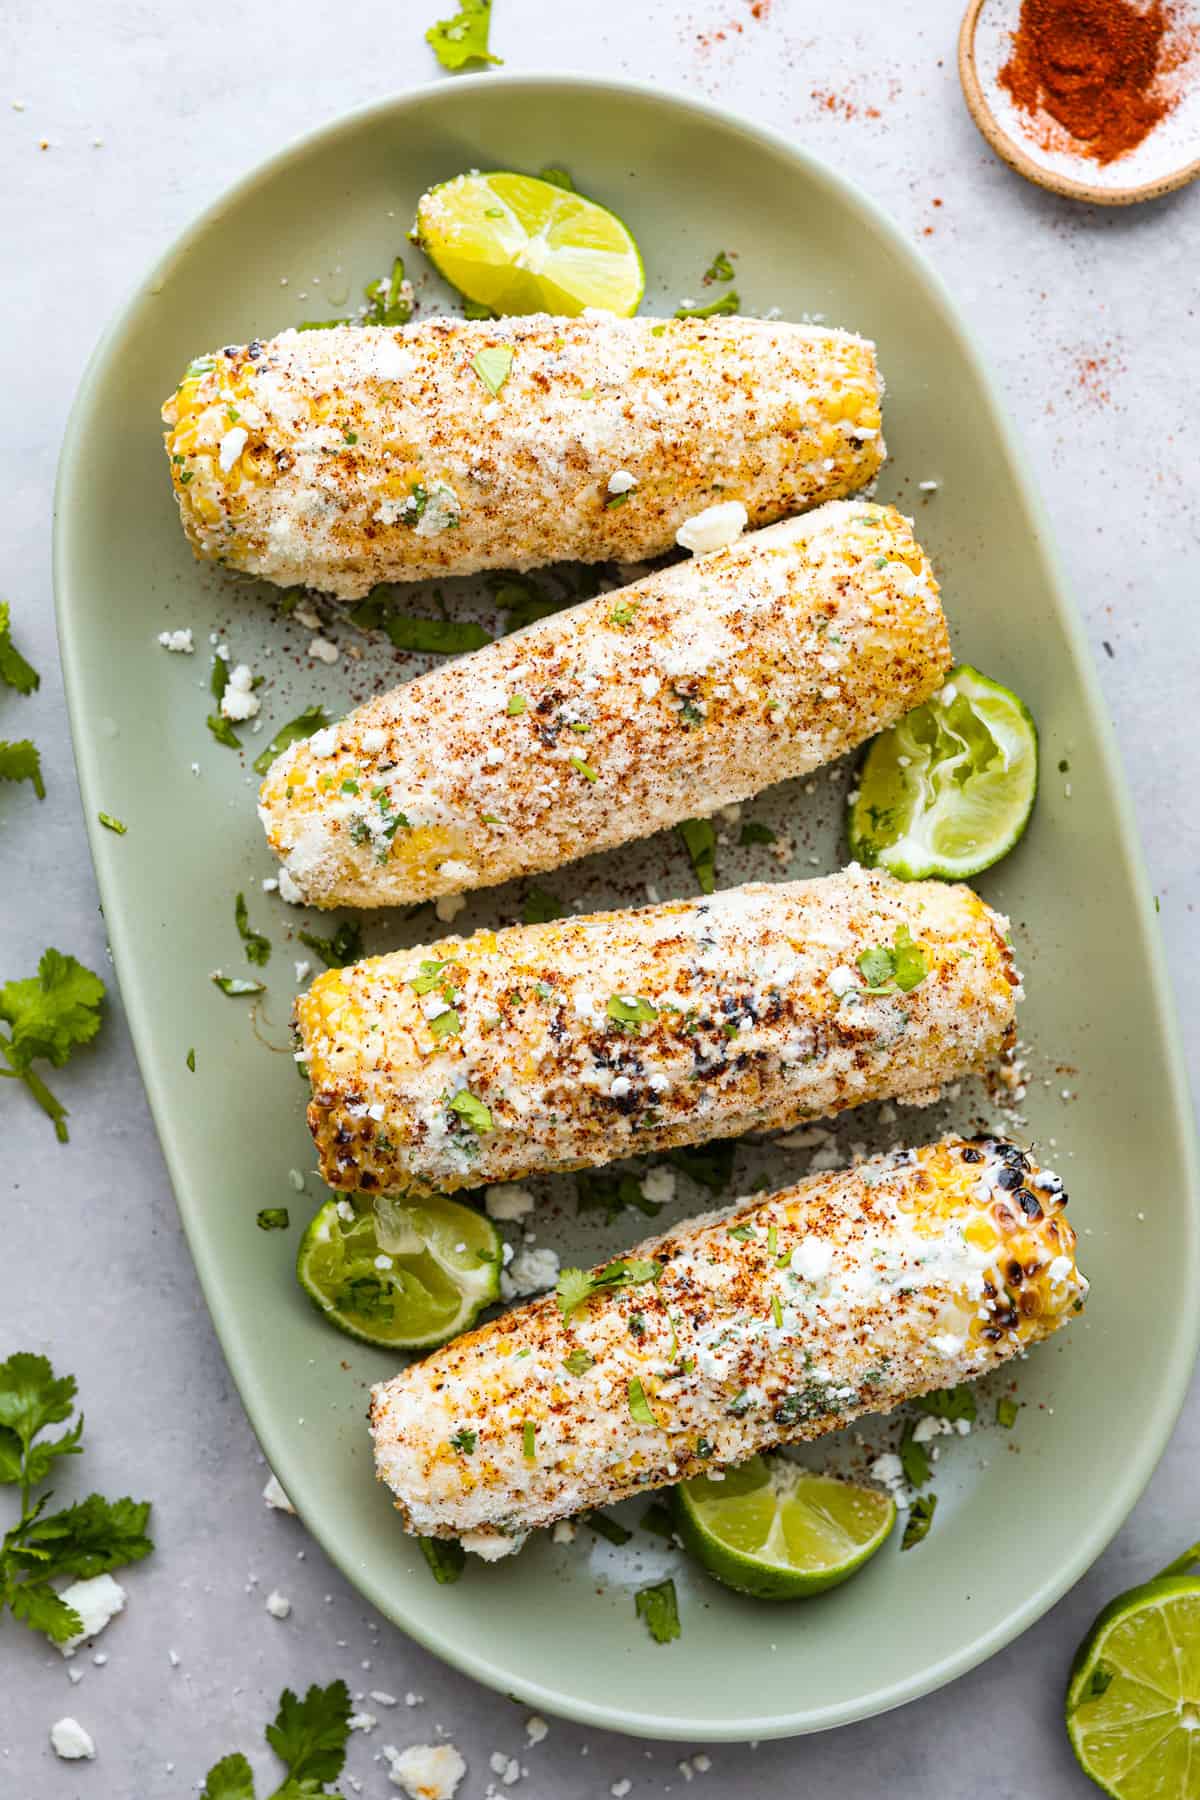 Grilled Mexican Street Corn - Yummy Recipe